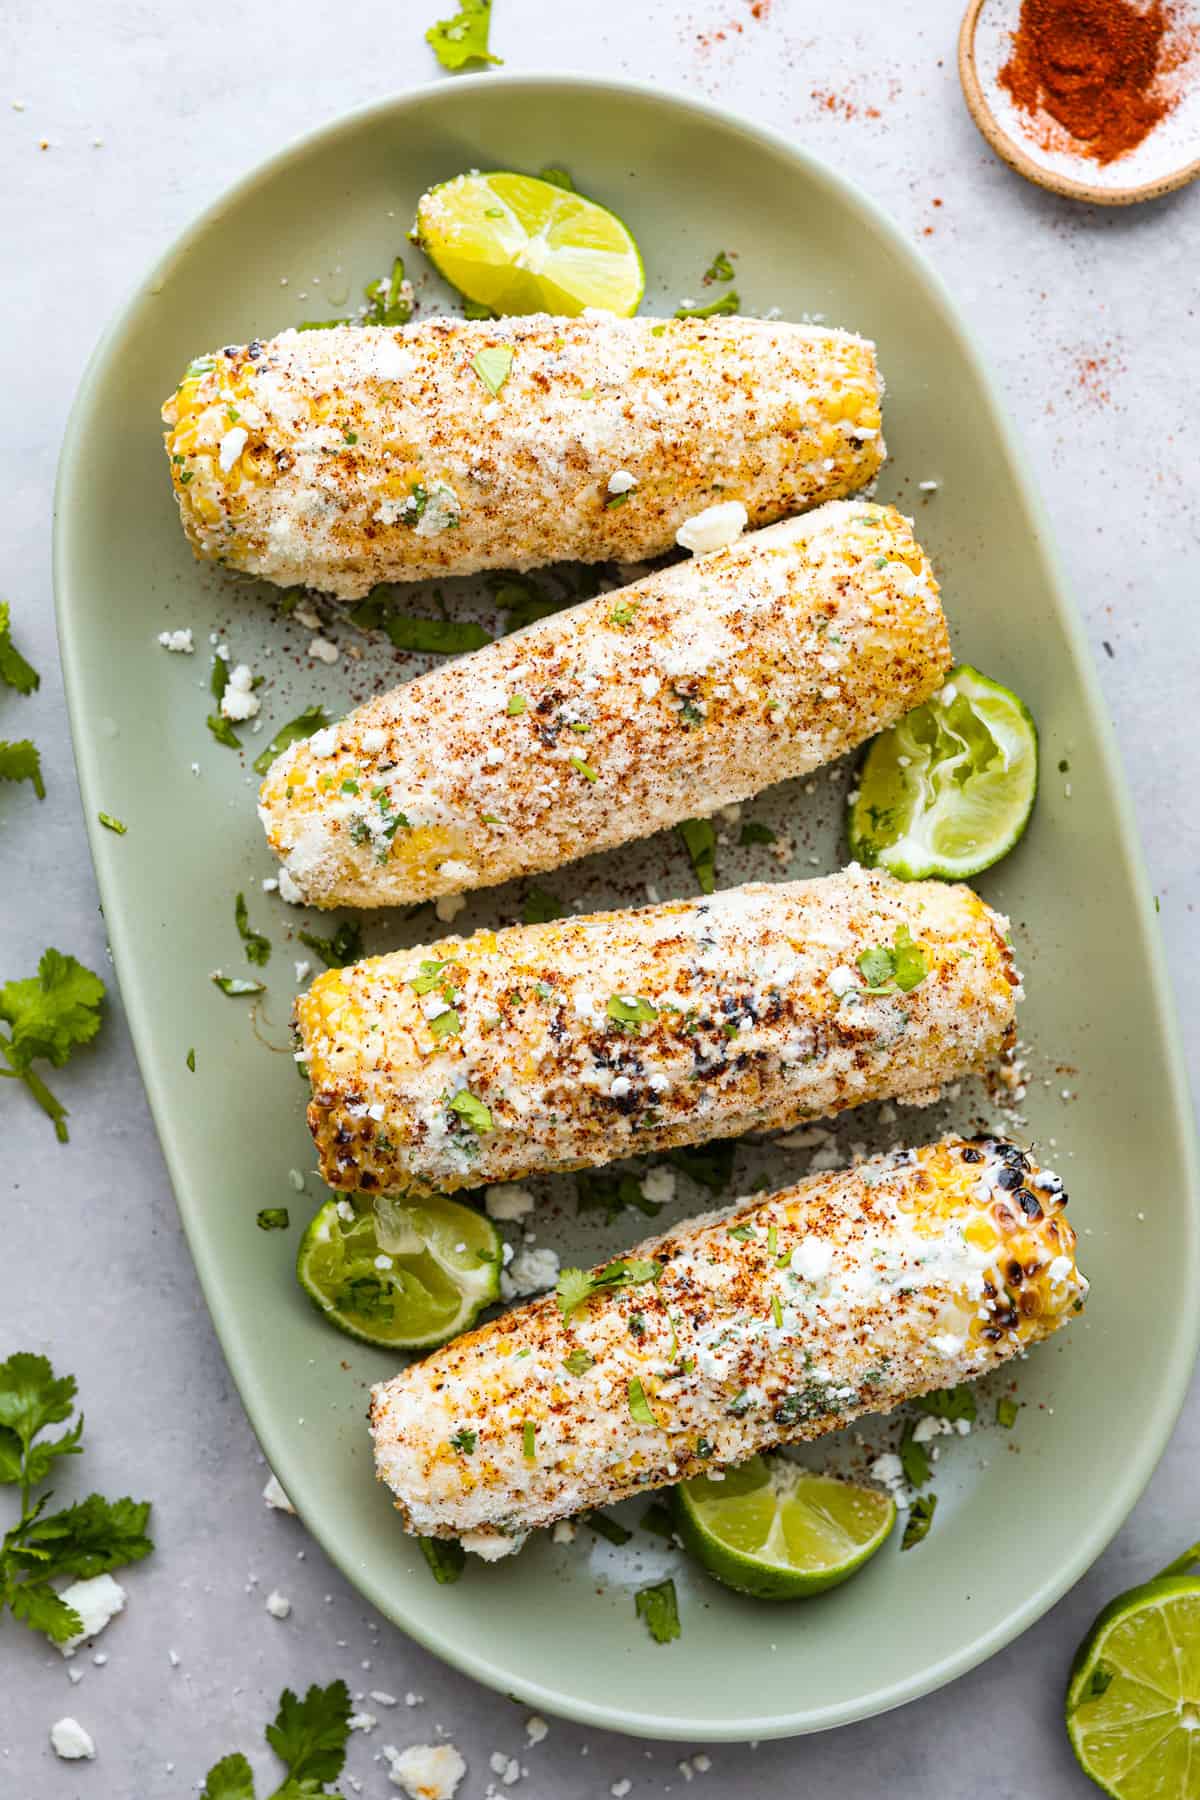 Grilled Mexican Street Corn - Yummy Recipe